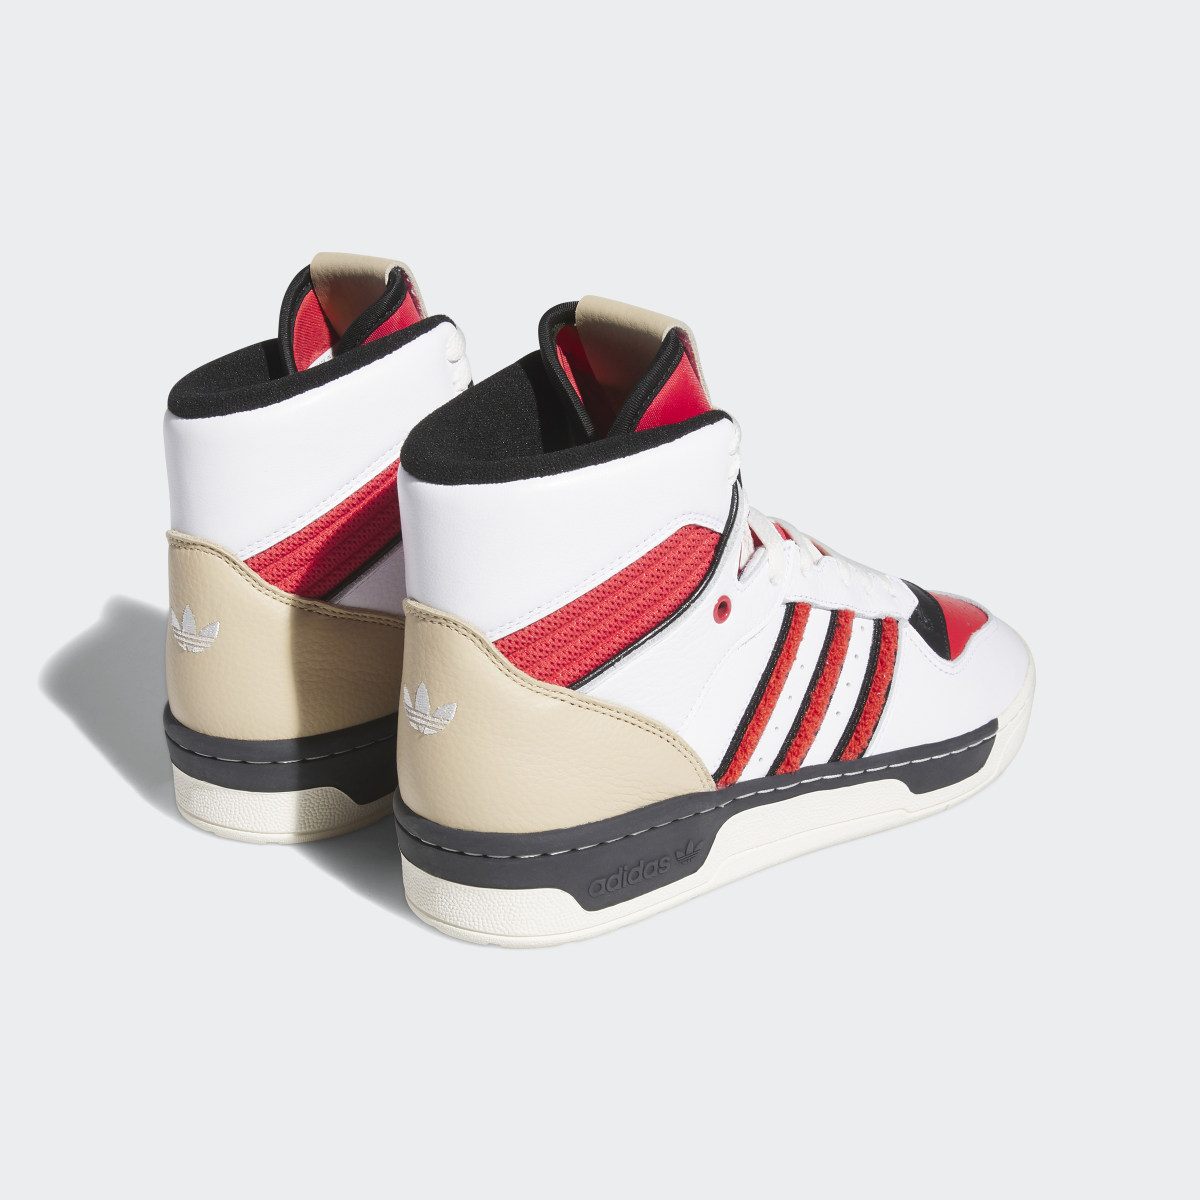 Adidas Rivalry High Shoes. 6